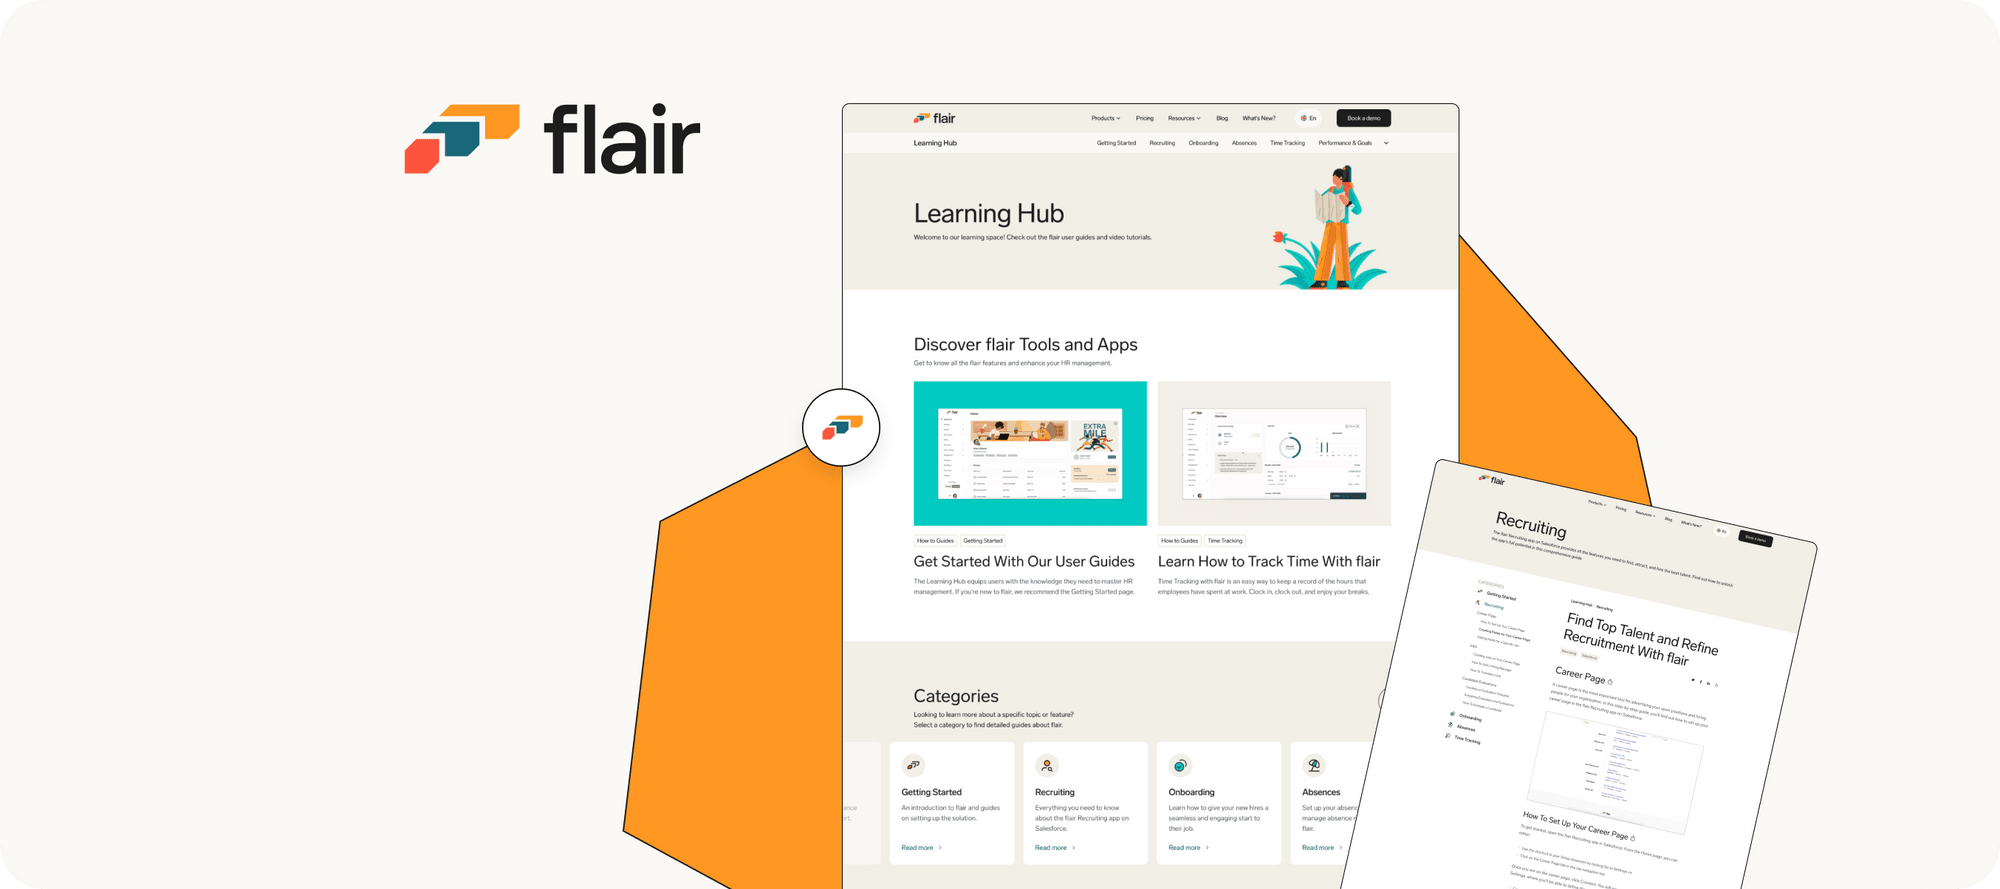 The Learning Hub: A Comprehensive Guide to flair